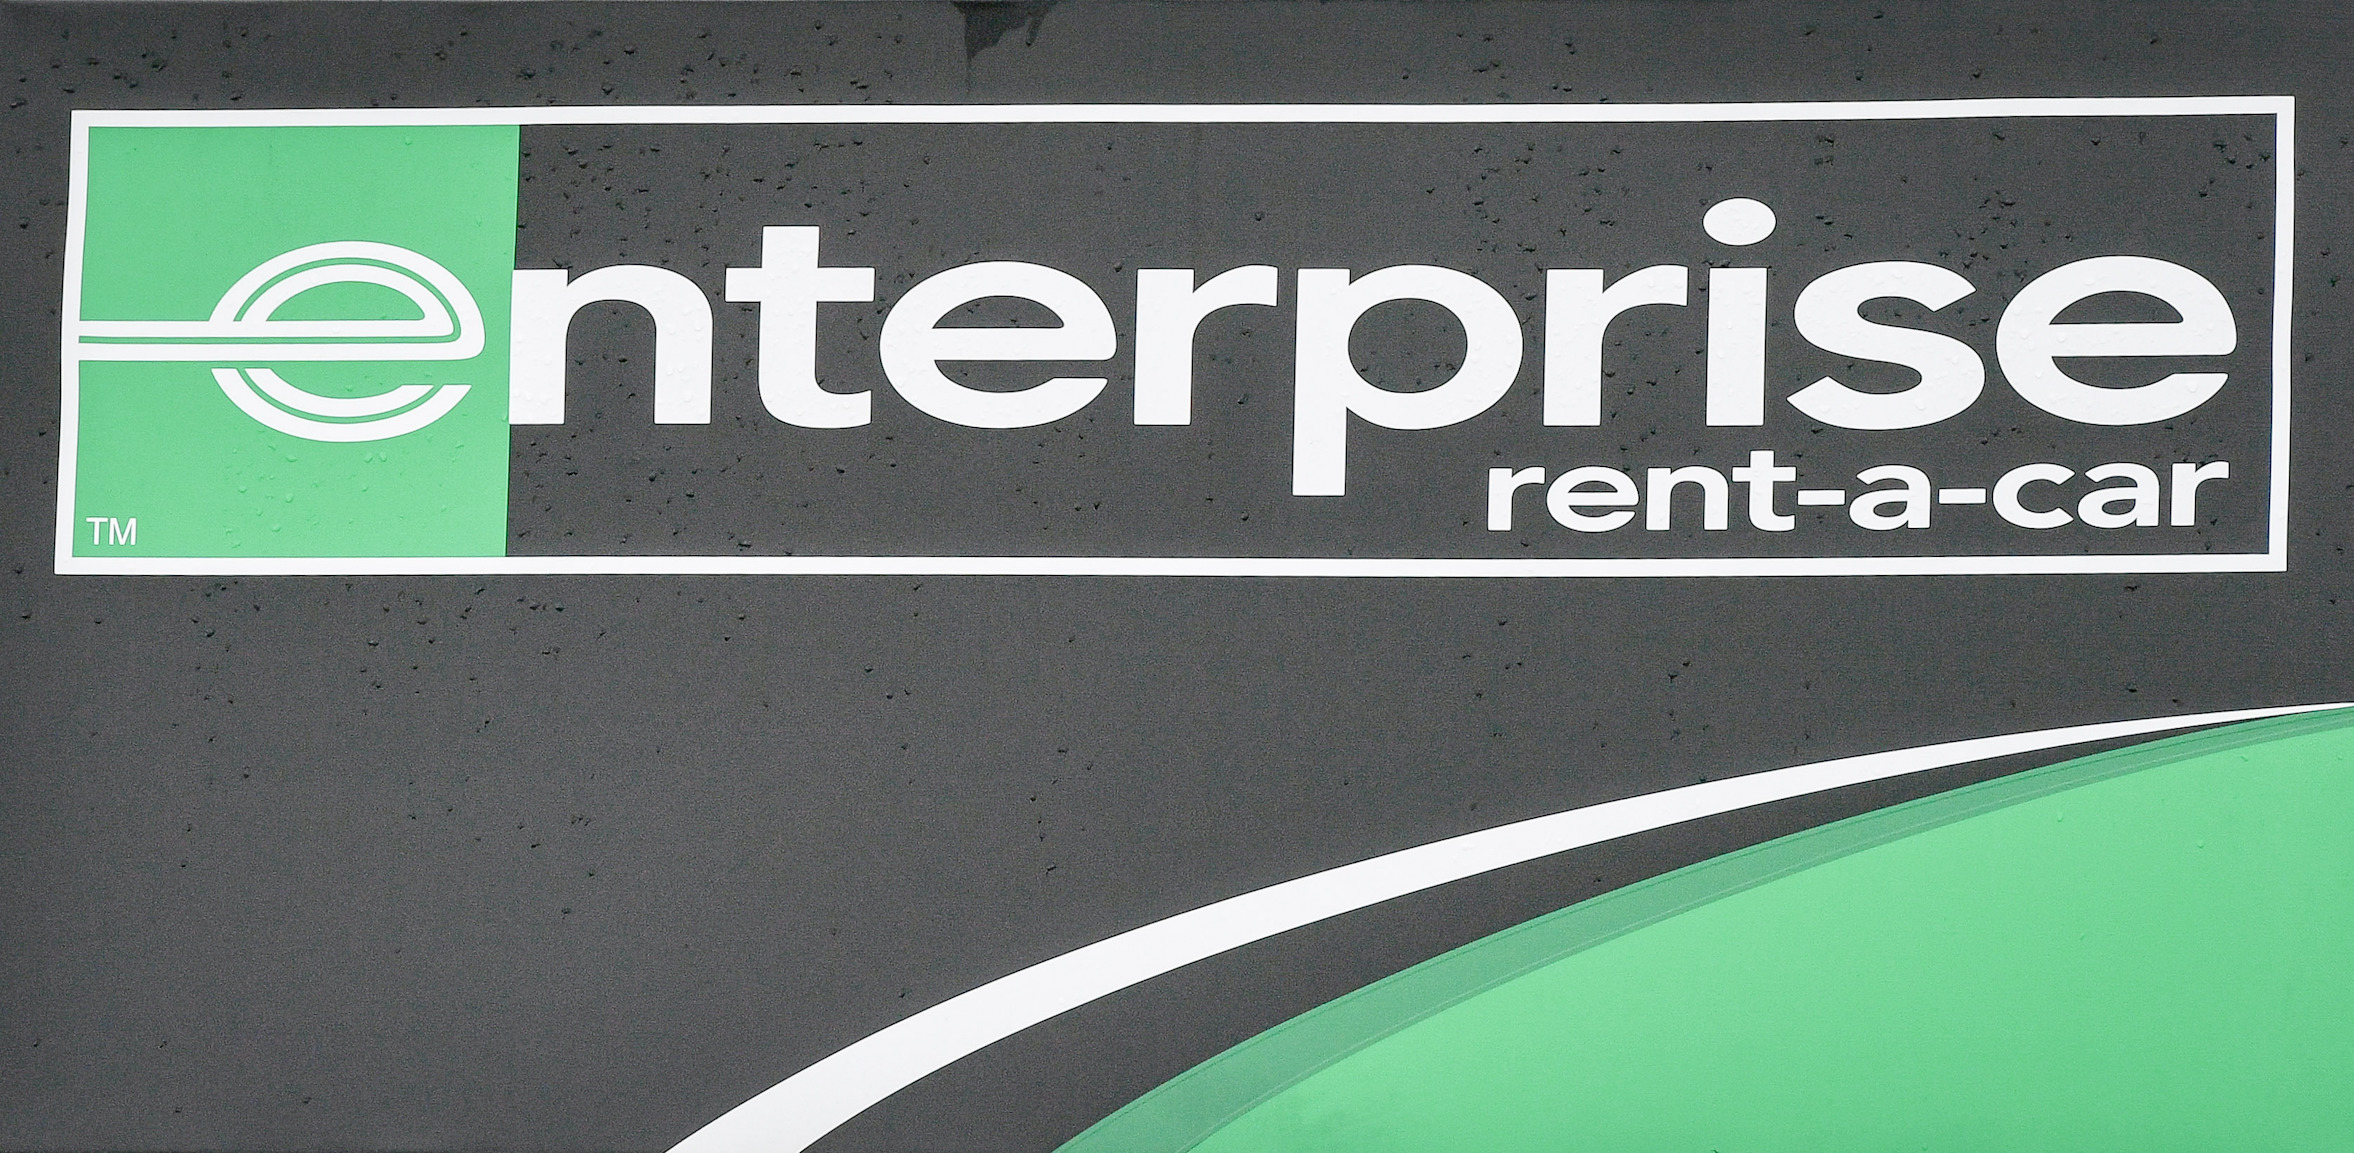 An Enterprise rental car sign in Bristol, as the company was the highest rated worldwide vehicle rental firm with 78% in an annual survey by Which? Travel magazine